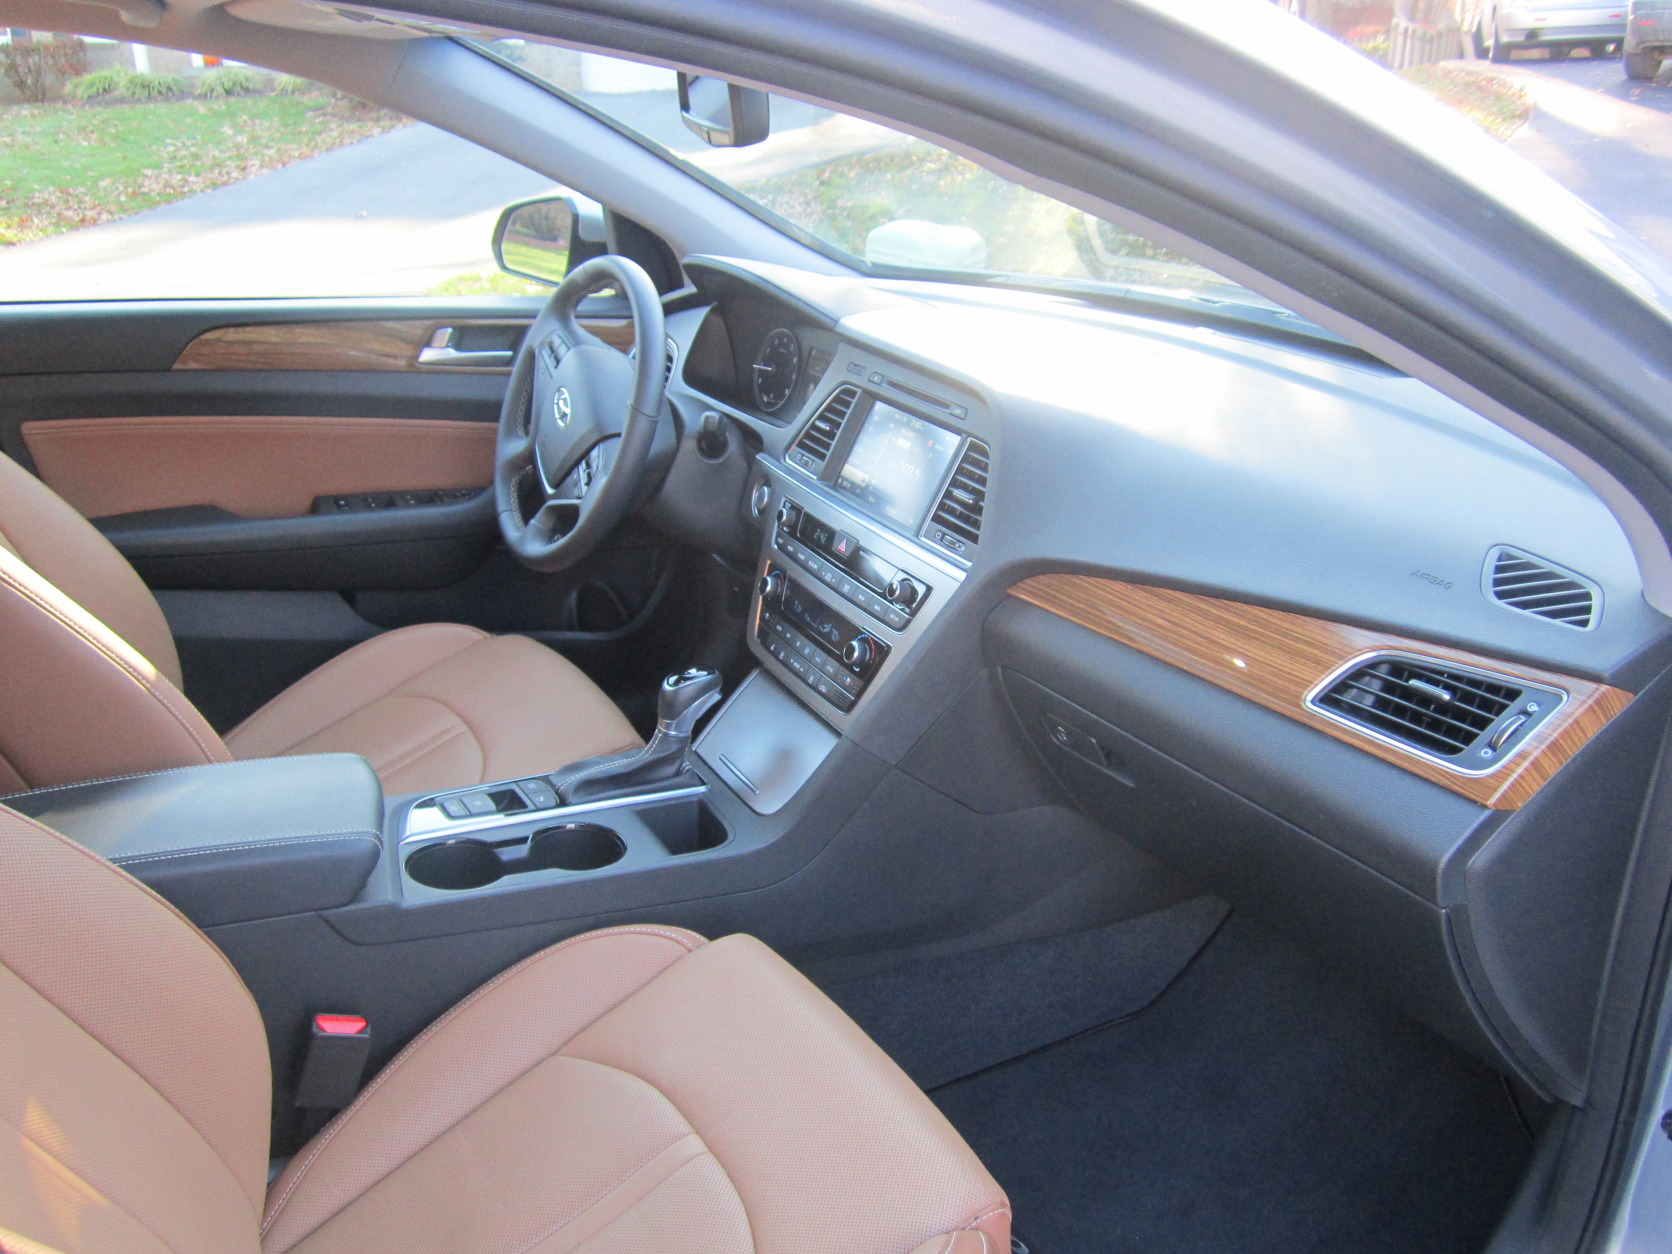 The interior color scheme of black and brown really works; the wood trim is a nice touch, too. The leather seats are heated and cooled and are comfy for about four hours. (WTOP/Mike Parris)